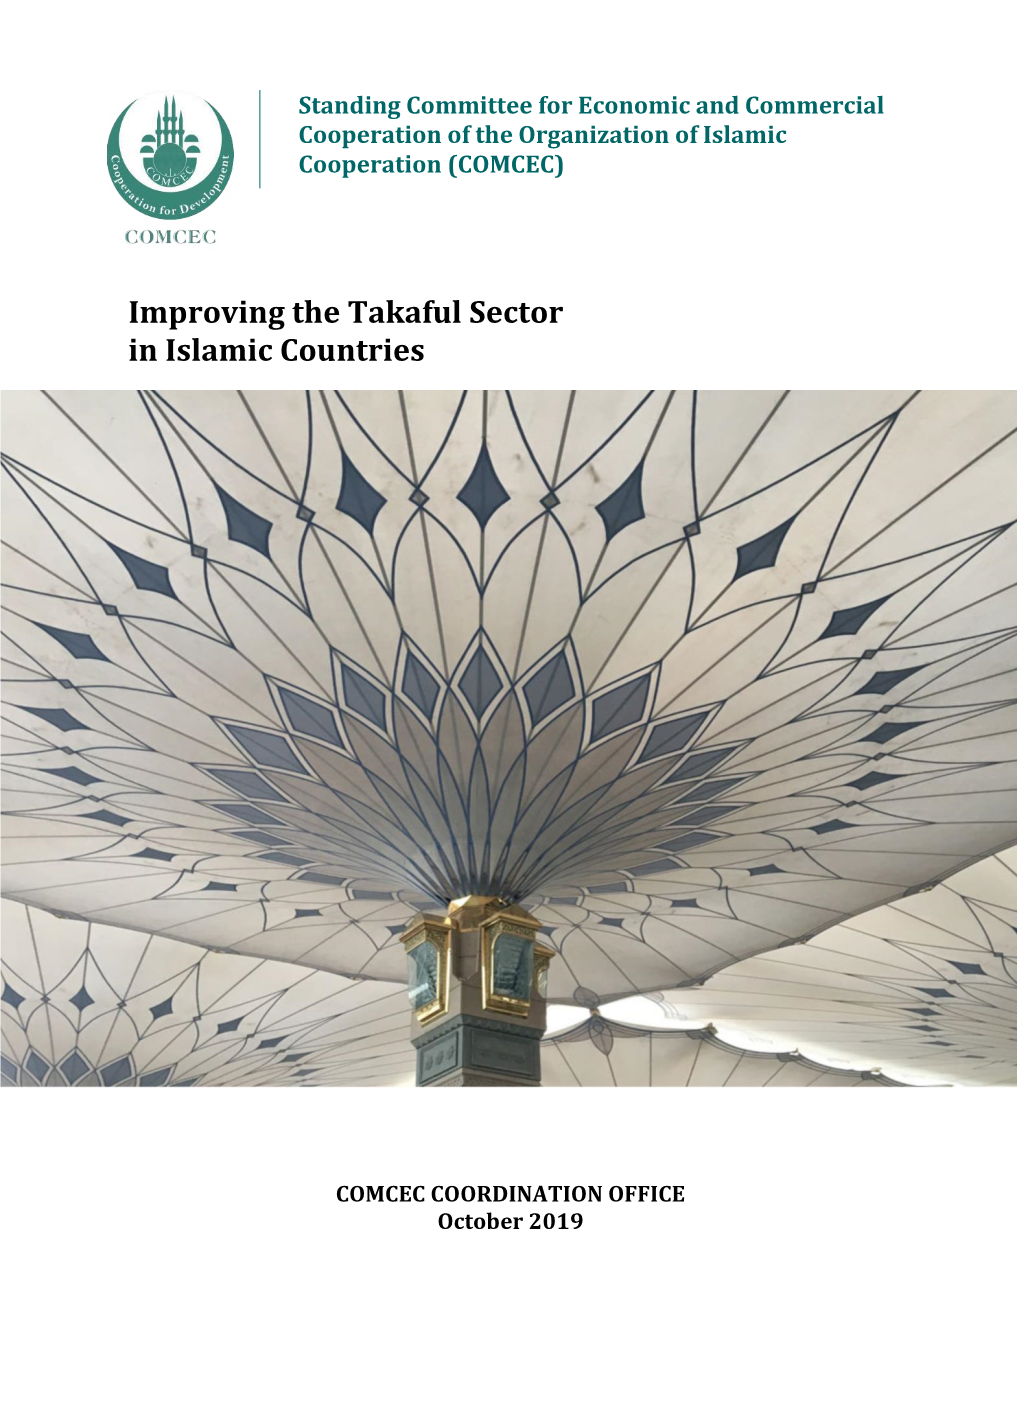 Improving the Takaful Sector in Islamic Countries